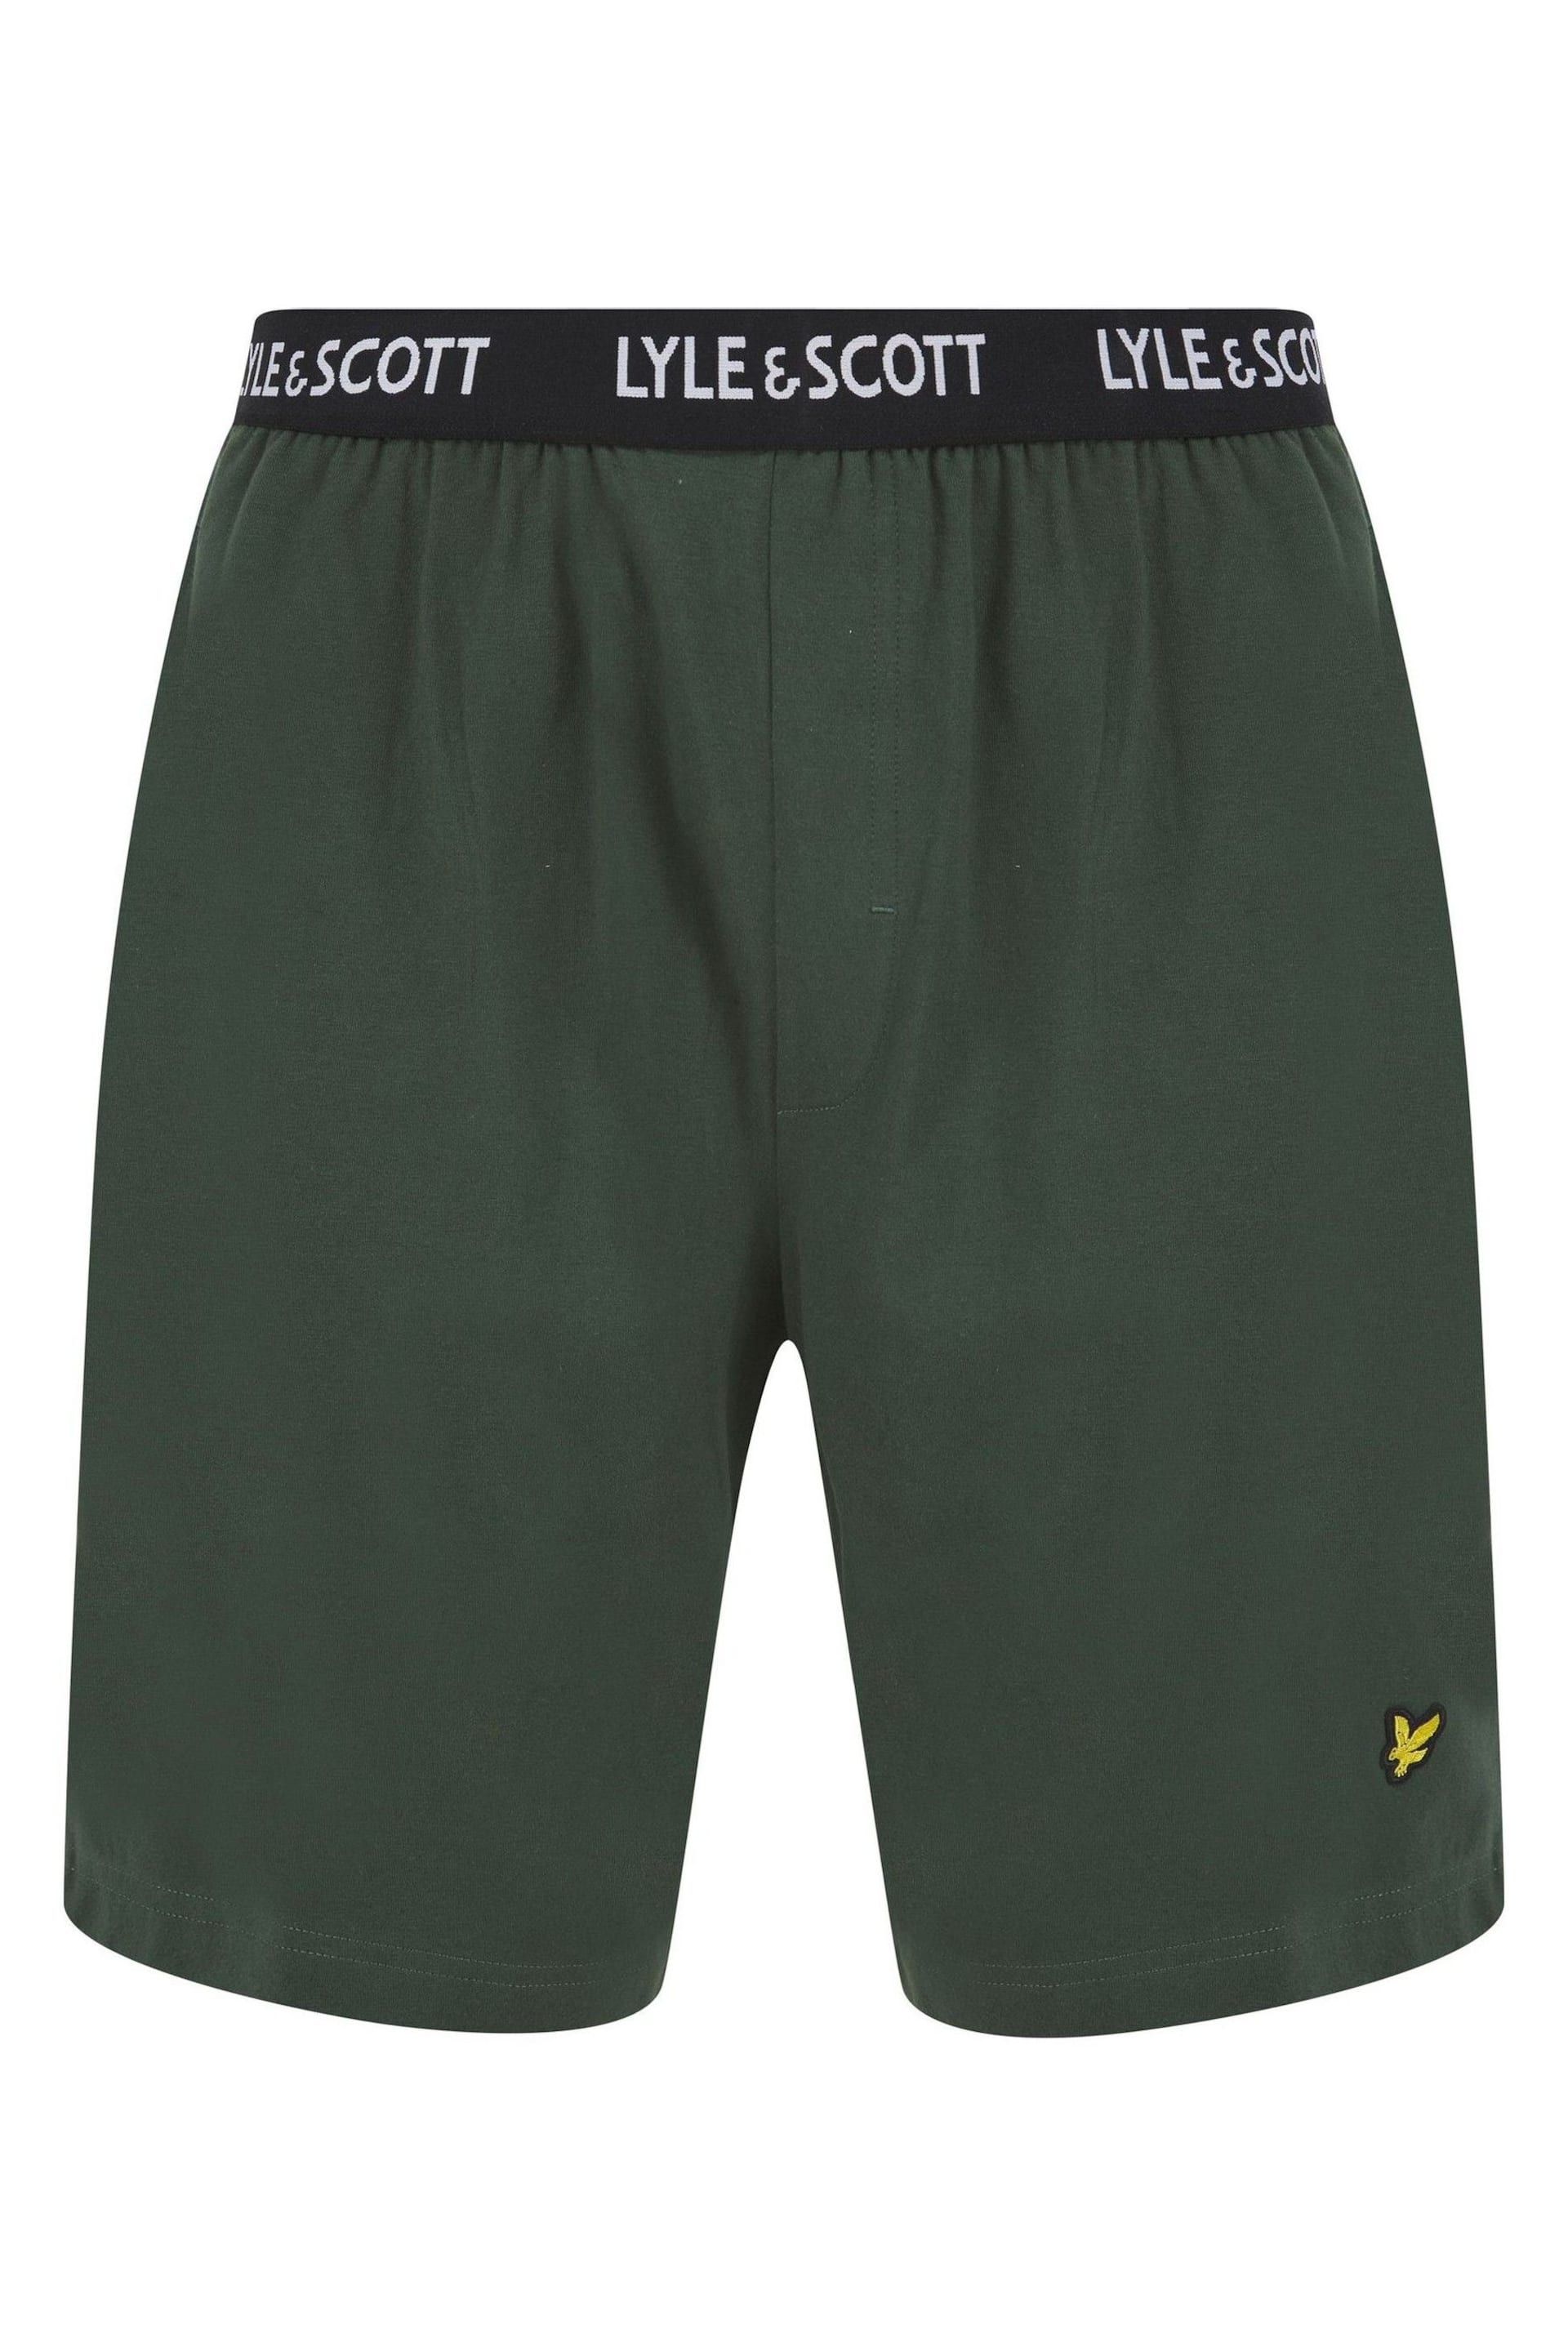 Lyle and Scott Green Charlie T-Shirt and Short Set - Image 4 of 6